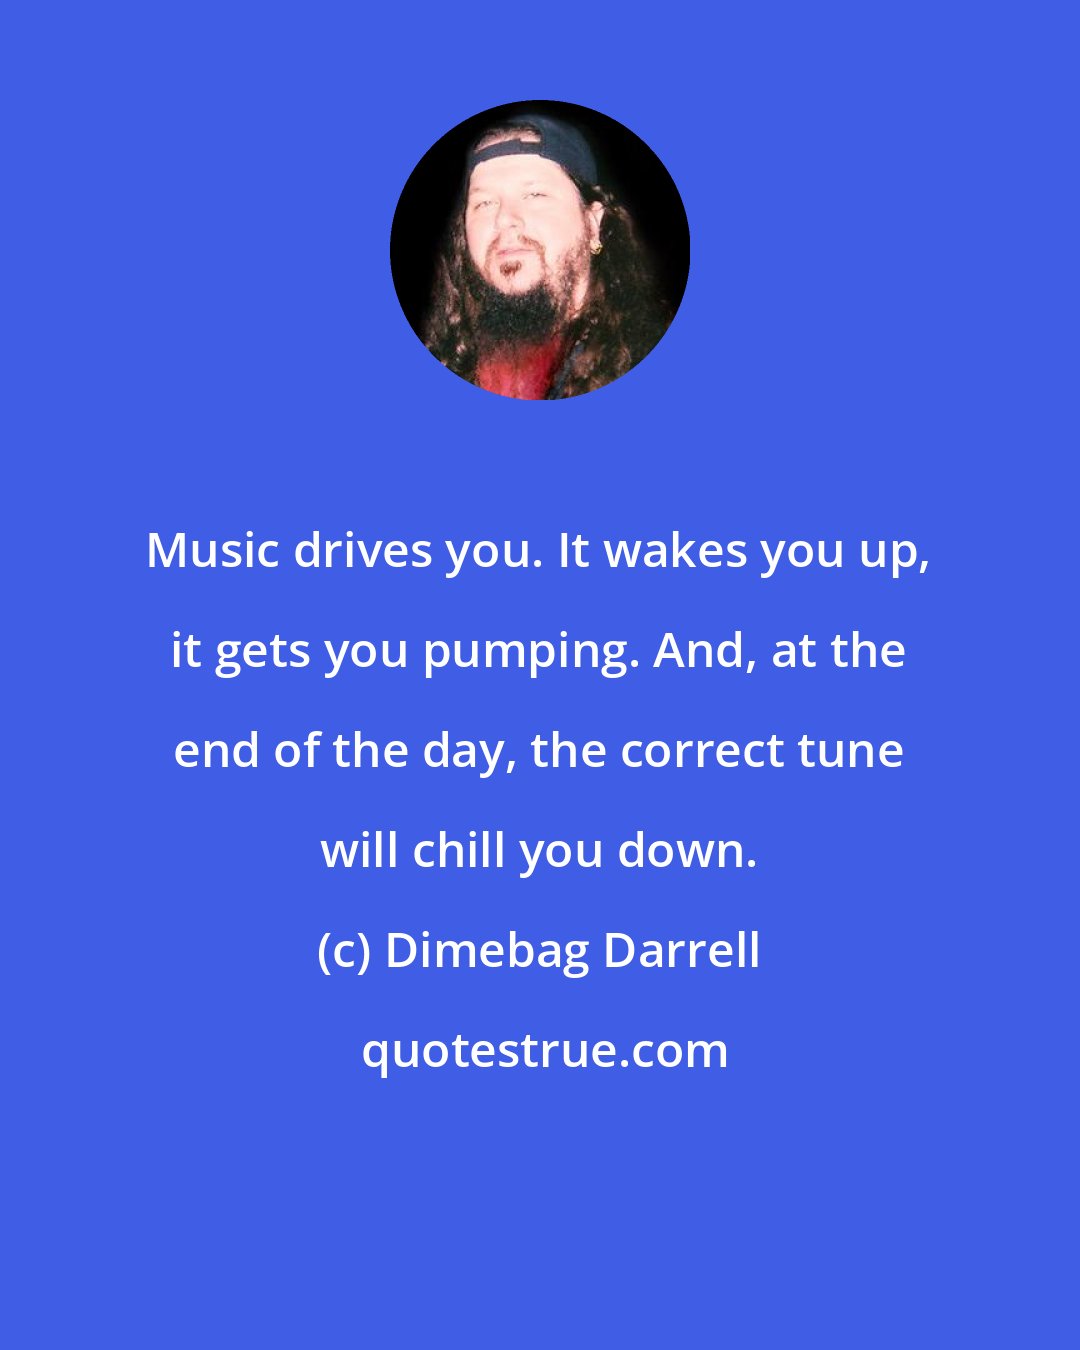 Dimebag Darrell: Music drives you. It wakes you up, it gets you pumping. And, at the end of the day, the correct tune will chill you down.